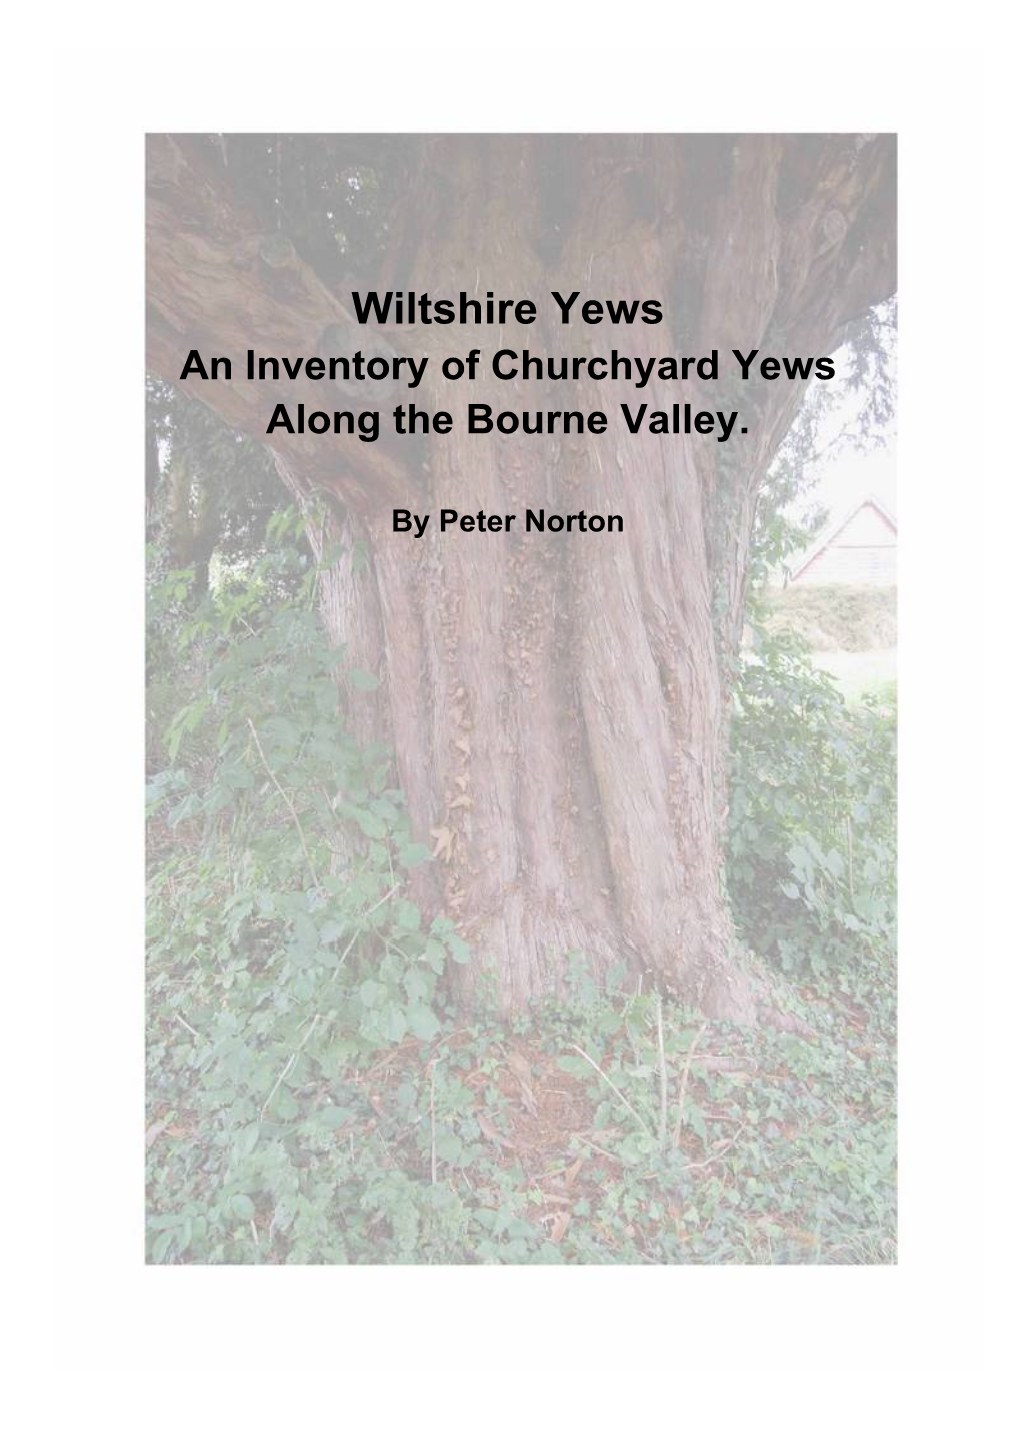 Wiltshire Yews an Inventory of Churchyard Yews Along the Bourne Valley